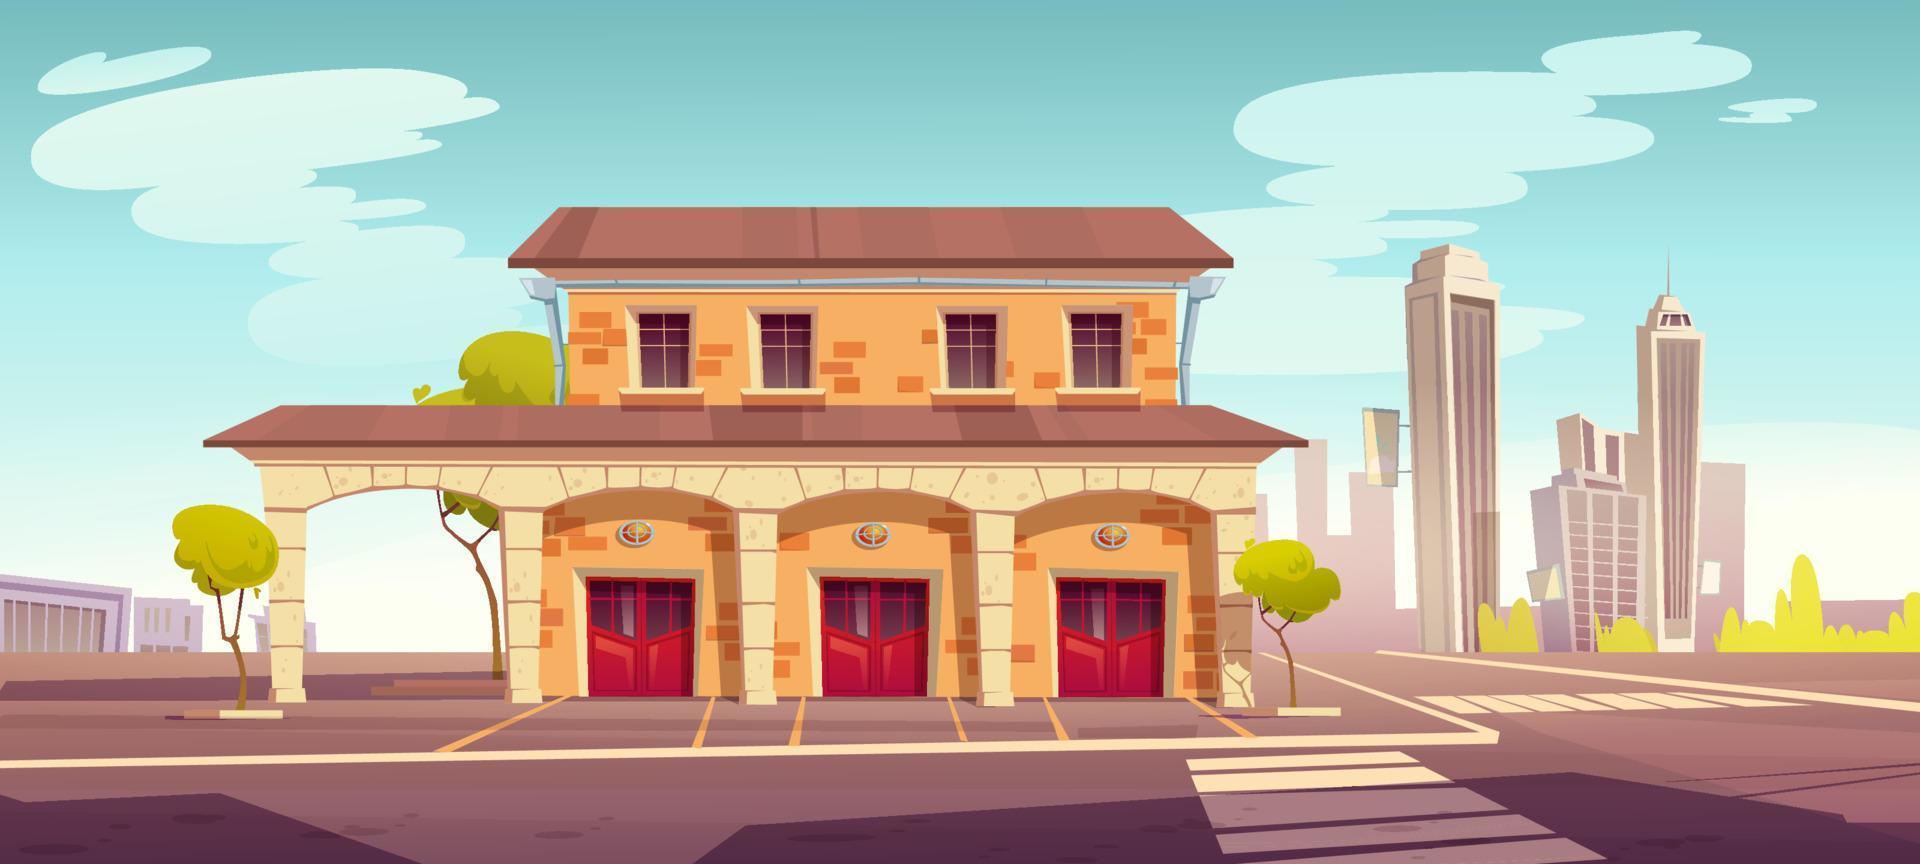 Fire station building with closed red gates vector